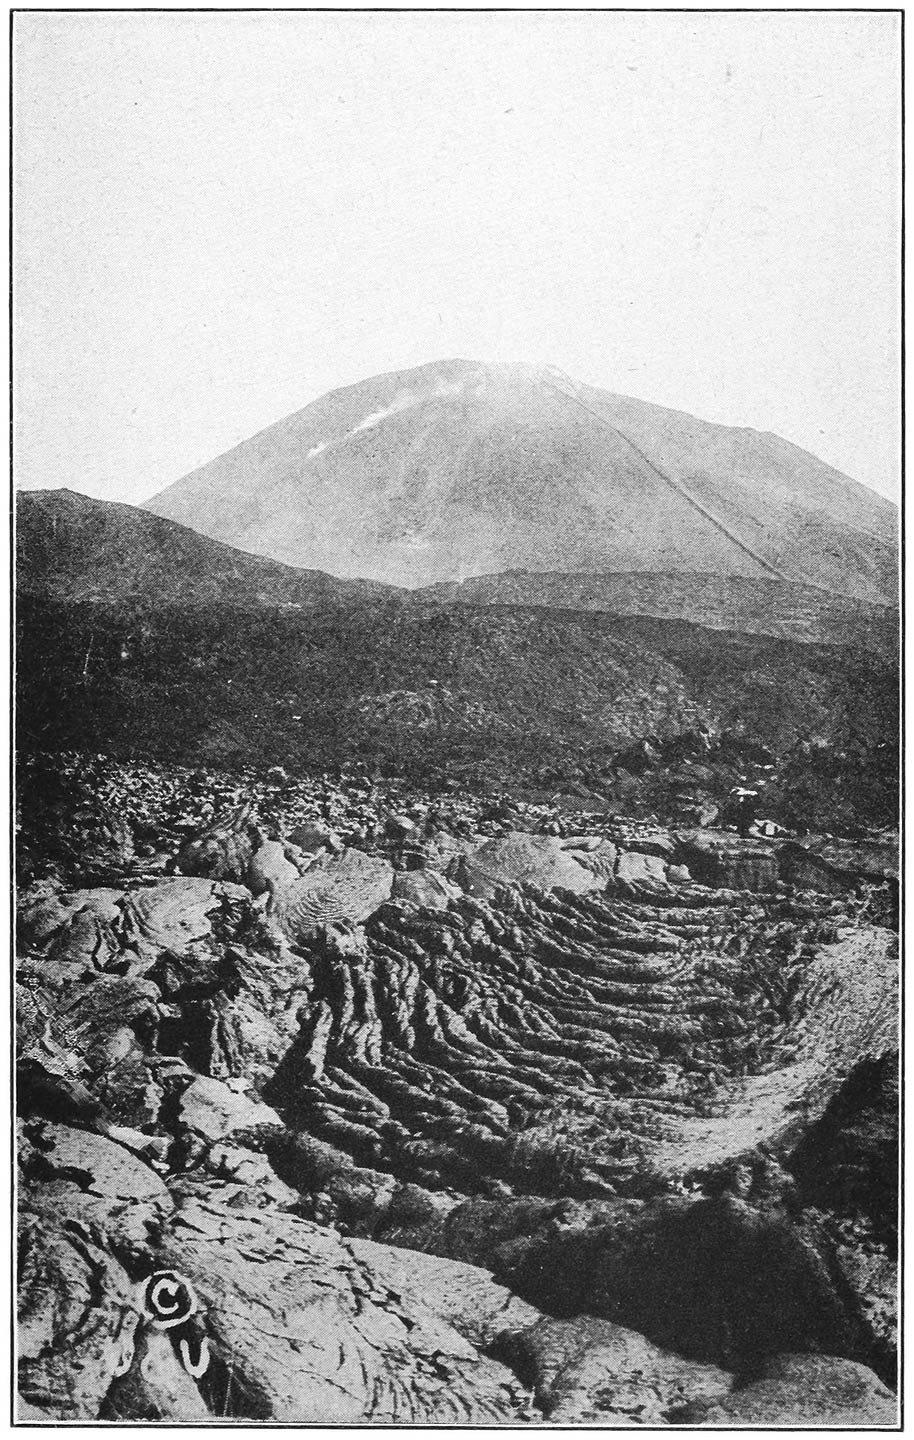 TWISTED LAVA AT THE FOOT OF MT. VESUVIUS, ITALY